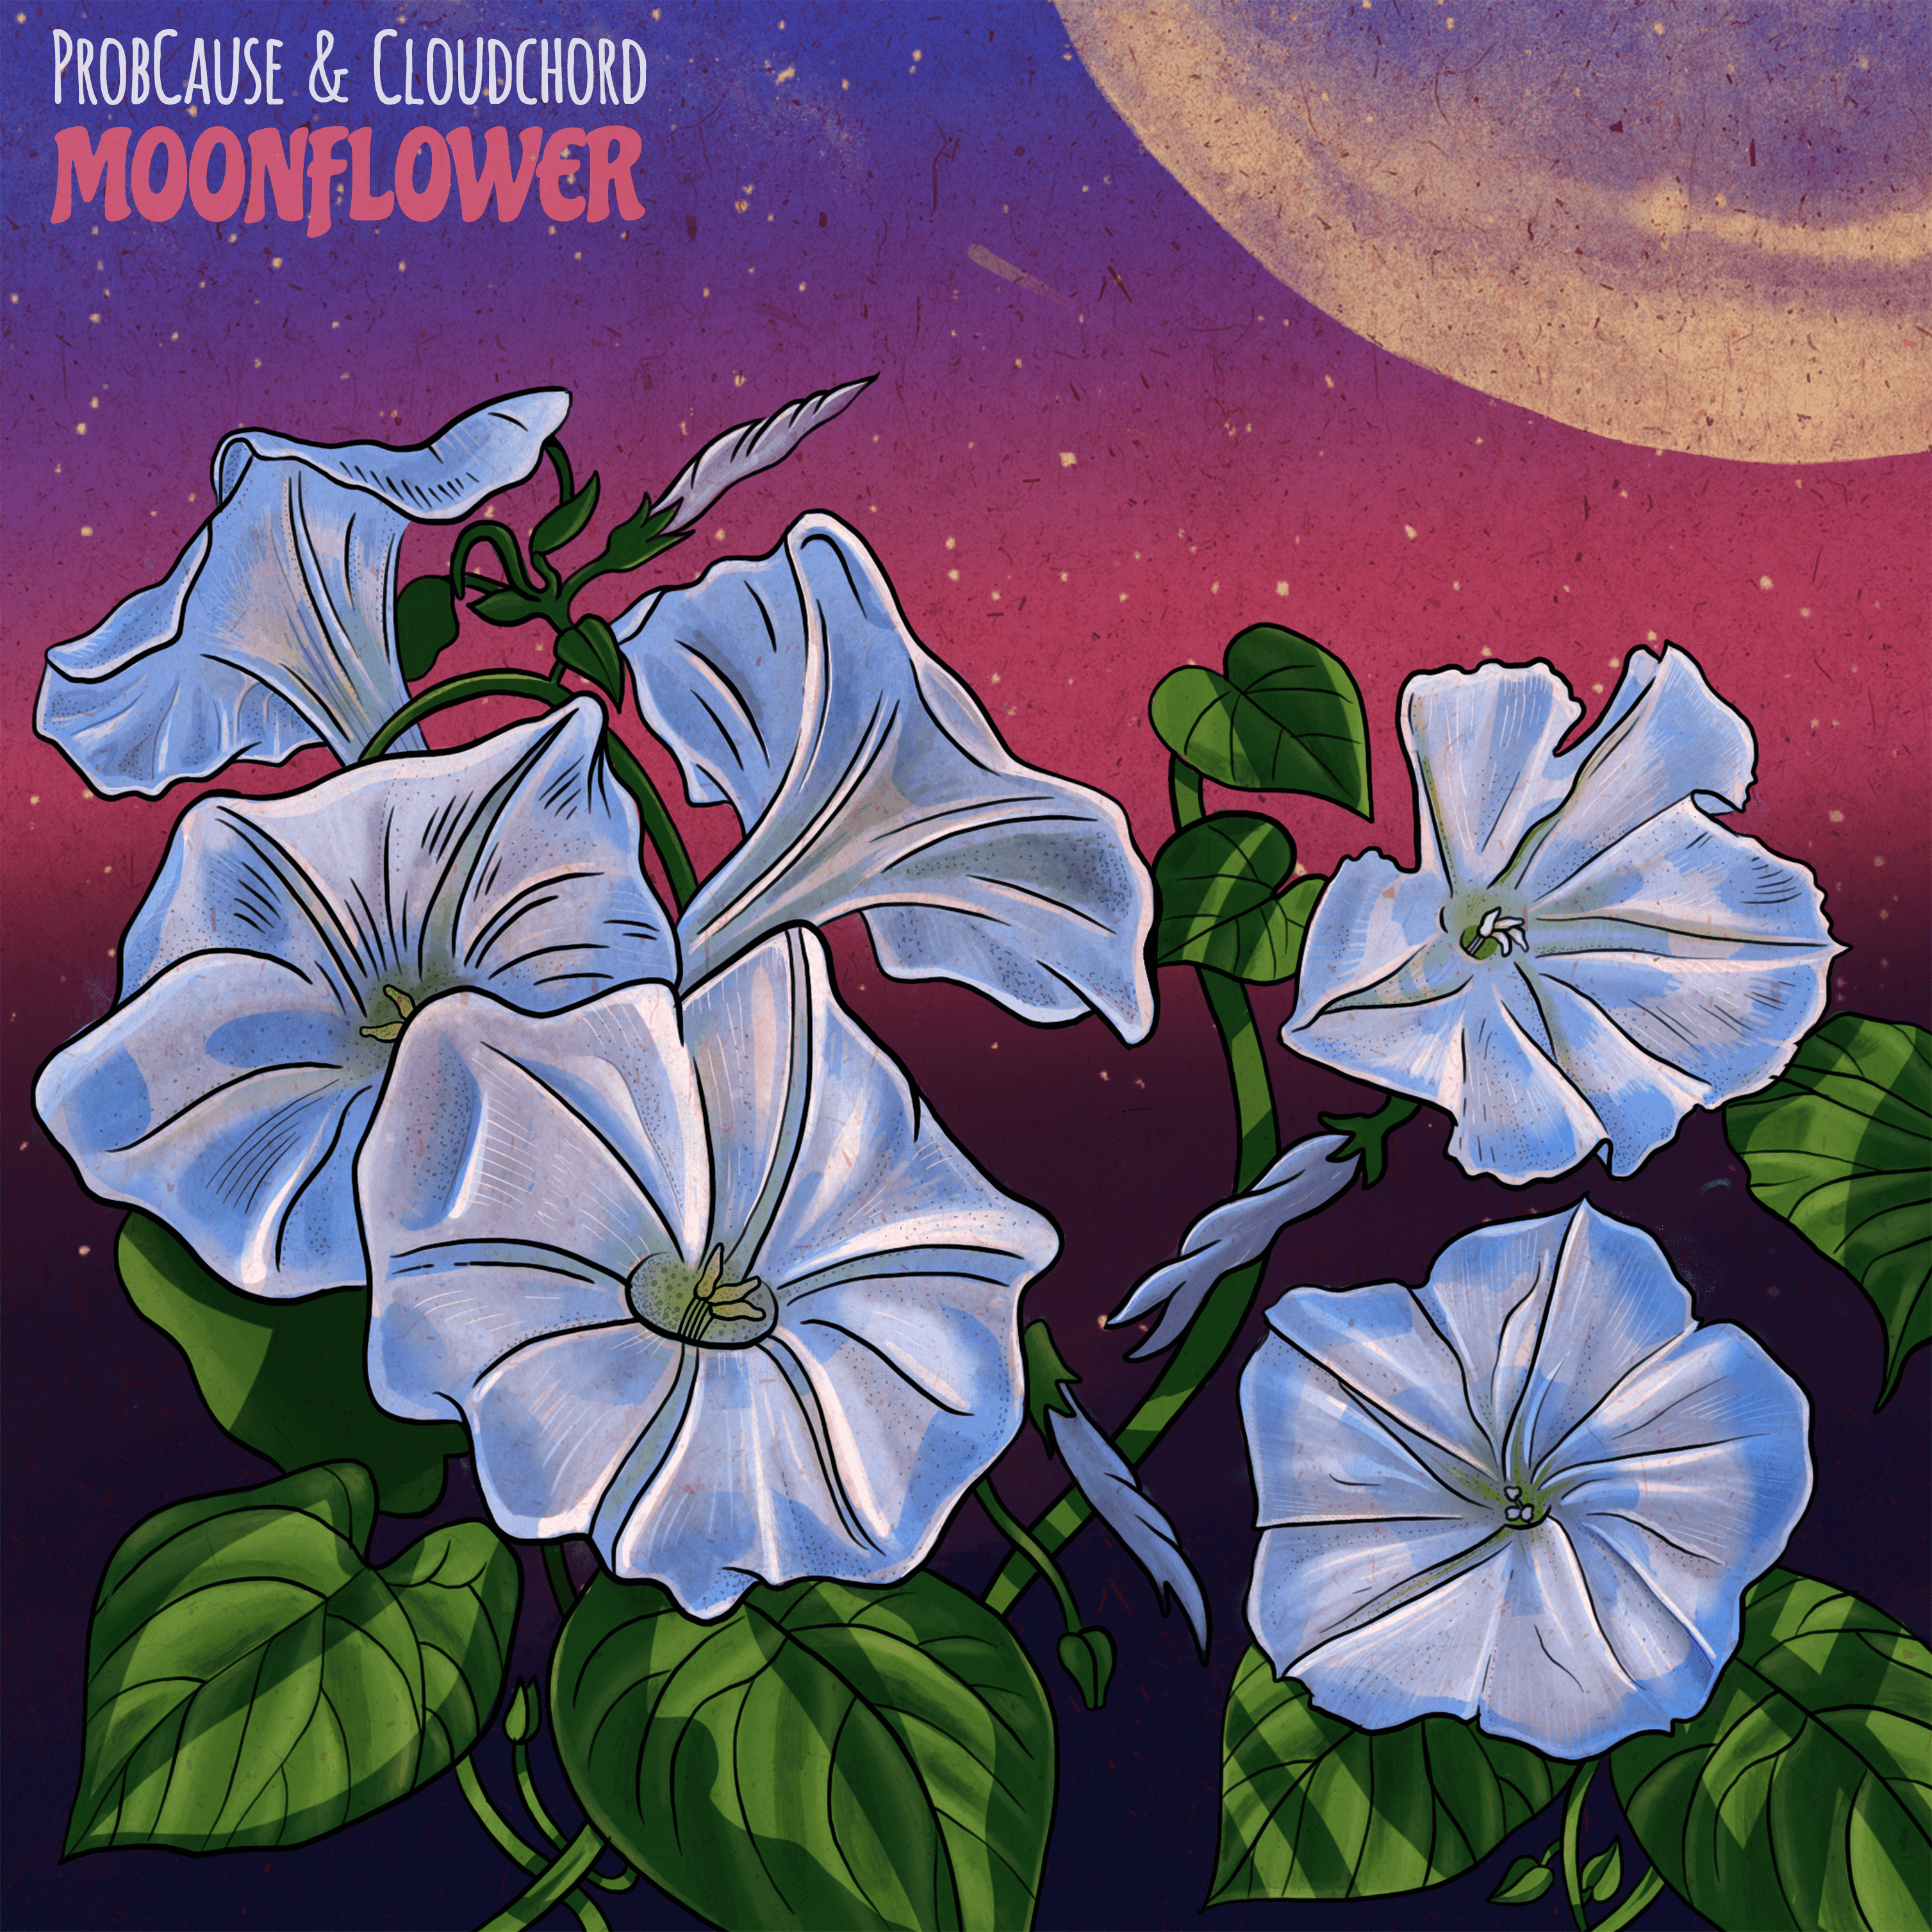 Find Comfort in ProbCause & Cloudchord’s New ‘Moonflower’ EP